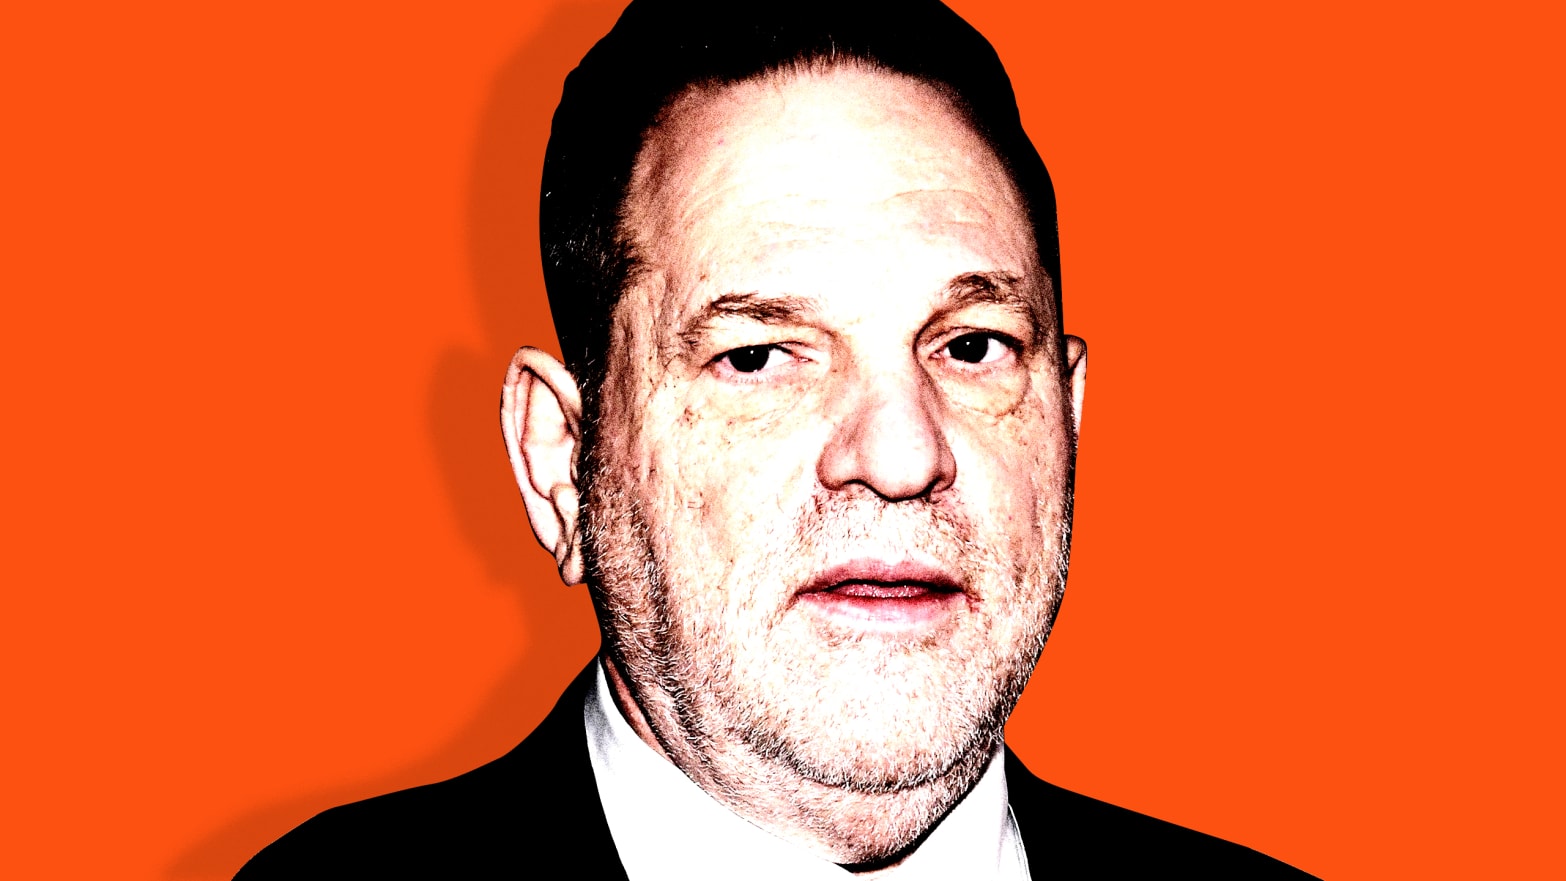 This Time, Harvey Weinstein Could Go to Jail